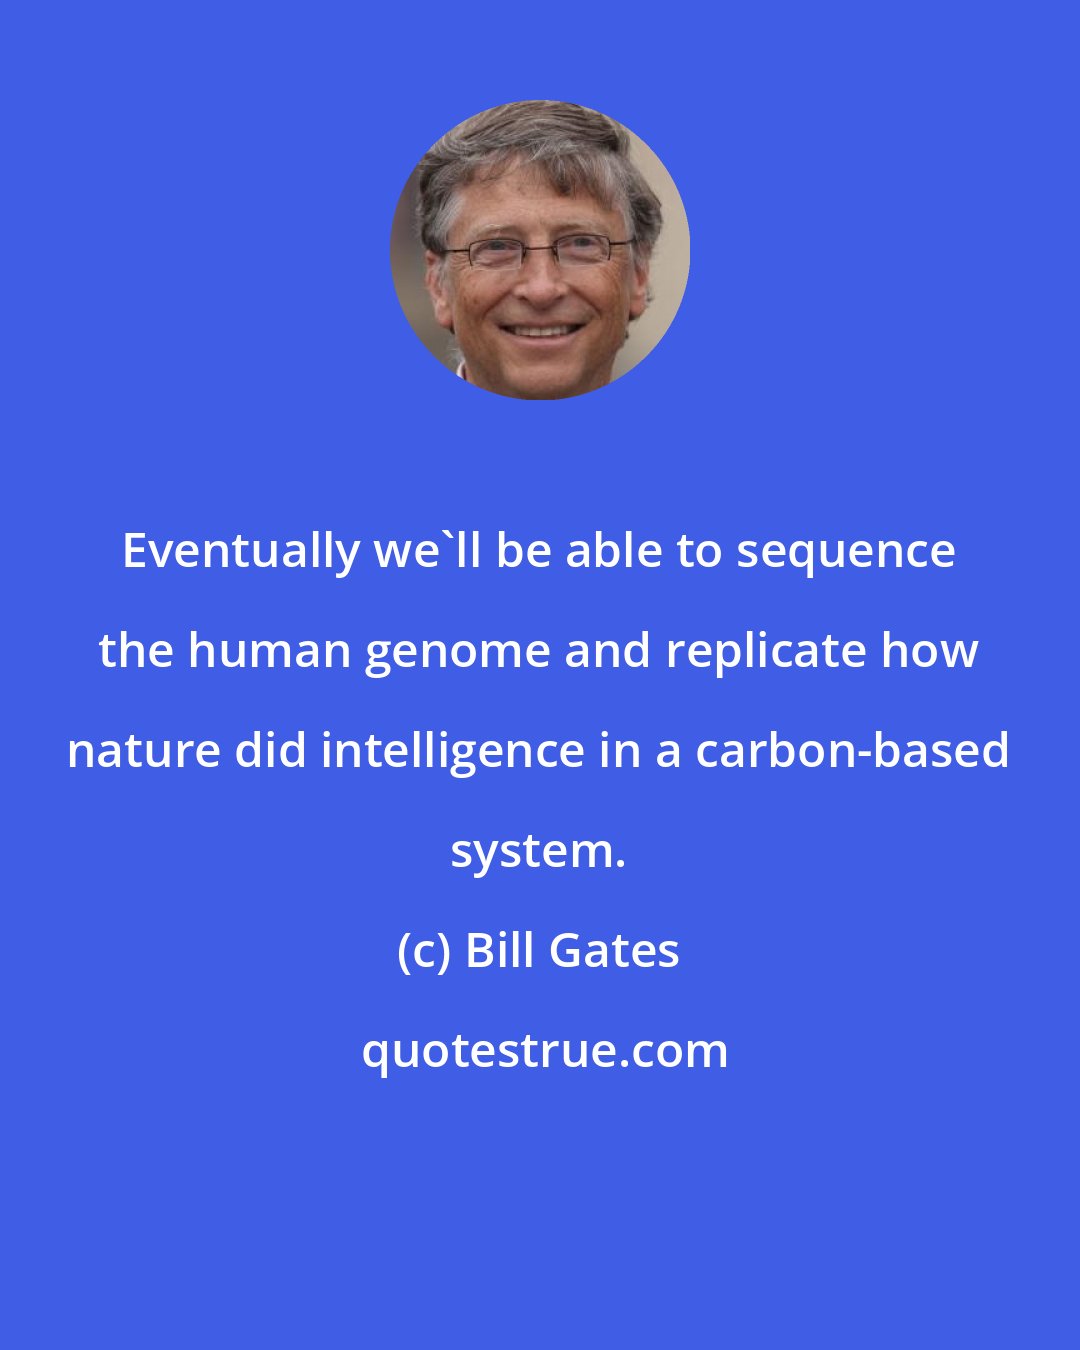 Bill Gates: Eventually we'll be able to sequence the human genome and replicate how nature did intelligence in a carbon-based system.